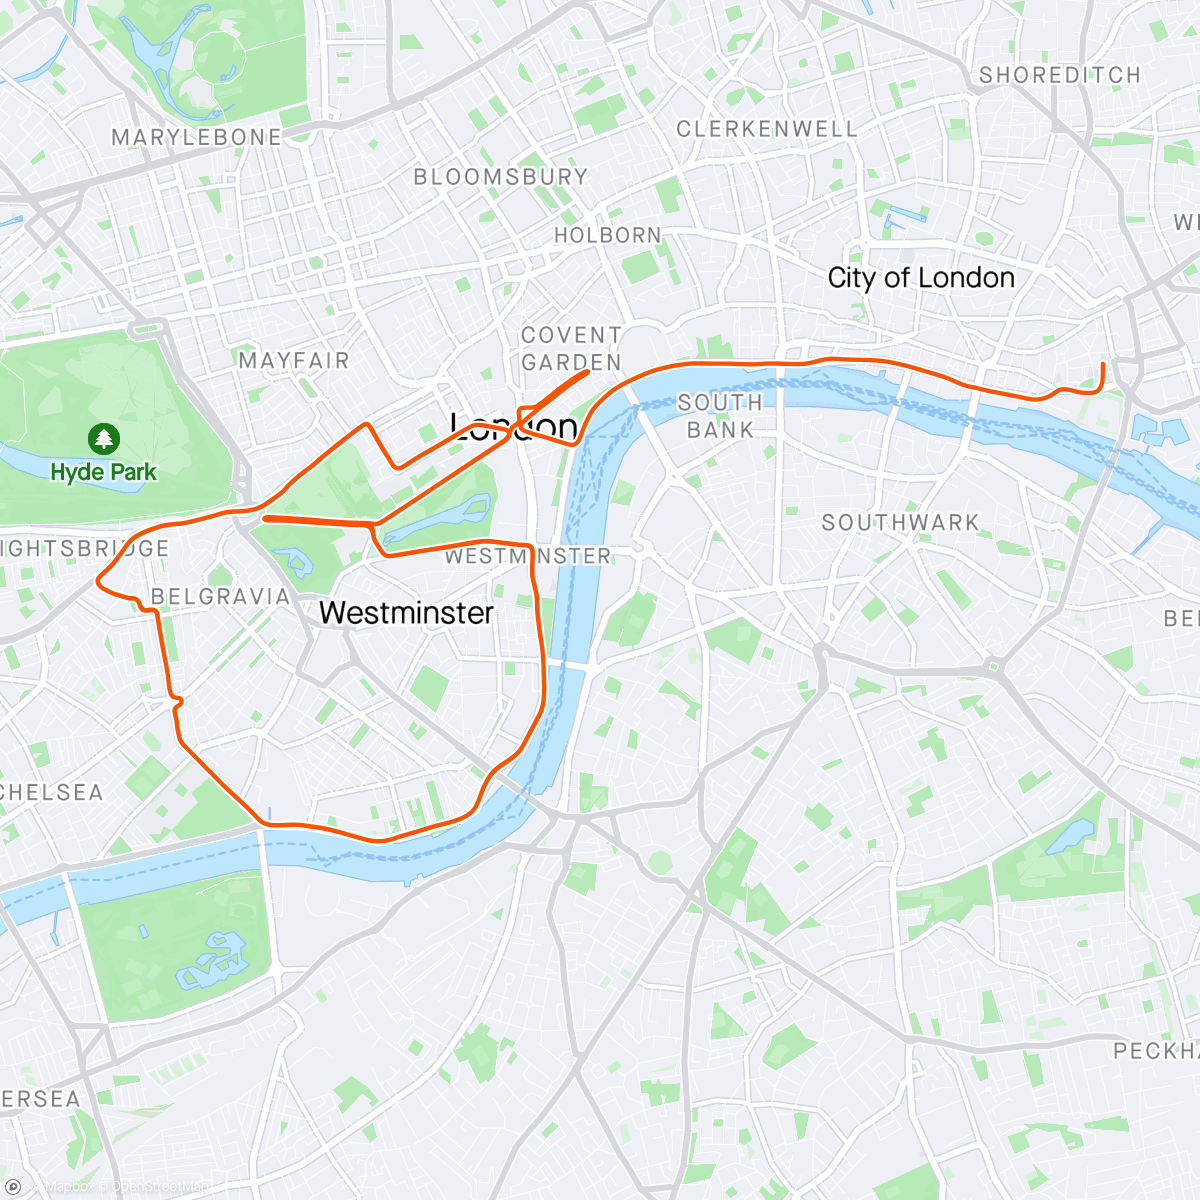 「Zwift - Group Ride: Vikings Valhalla Recovery Ride  (D) on Greater London Flat in London」活動的地圖